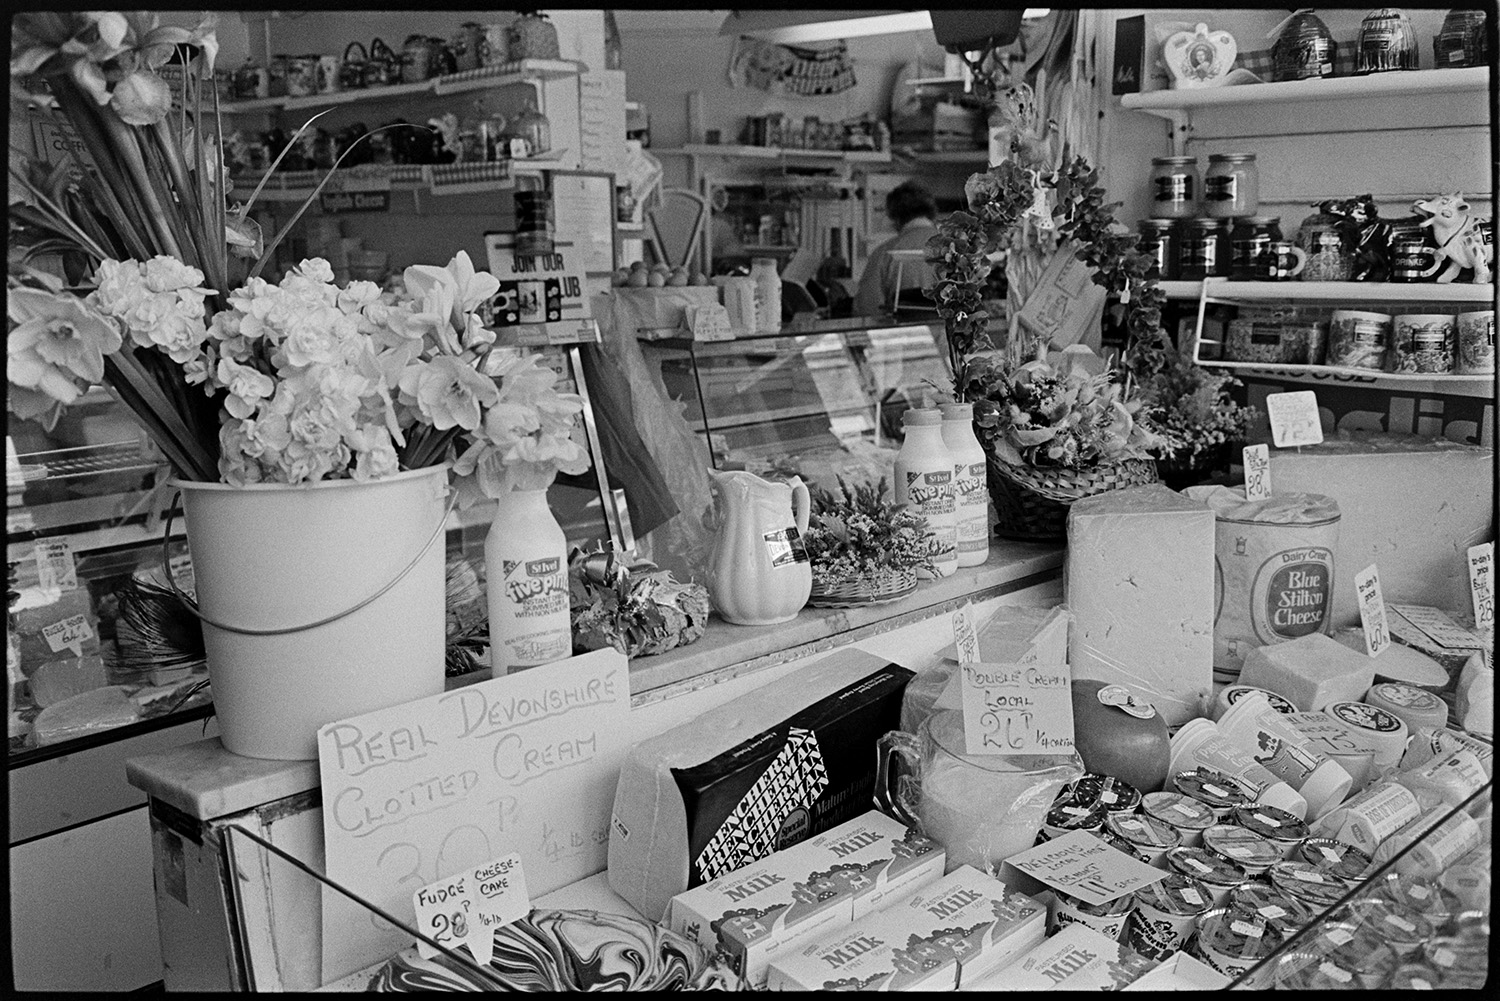 Row of shops with shoppers, displays of flowers and fruit. 
[A refrigerated display of cheese, cartons of milk, yoghurt and cream in a shop in Butcher's Row, Barnstaple. A bucket of daffodils, and jars of honey can be seen on the shelves in the shop, amongst other goods.]